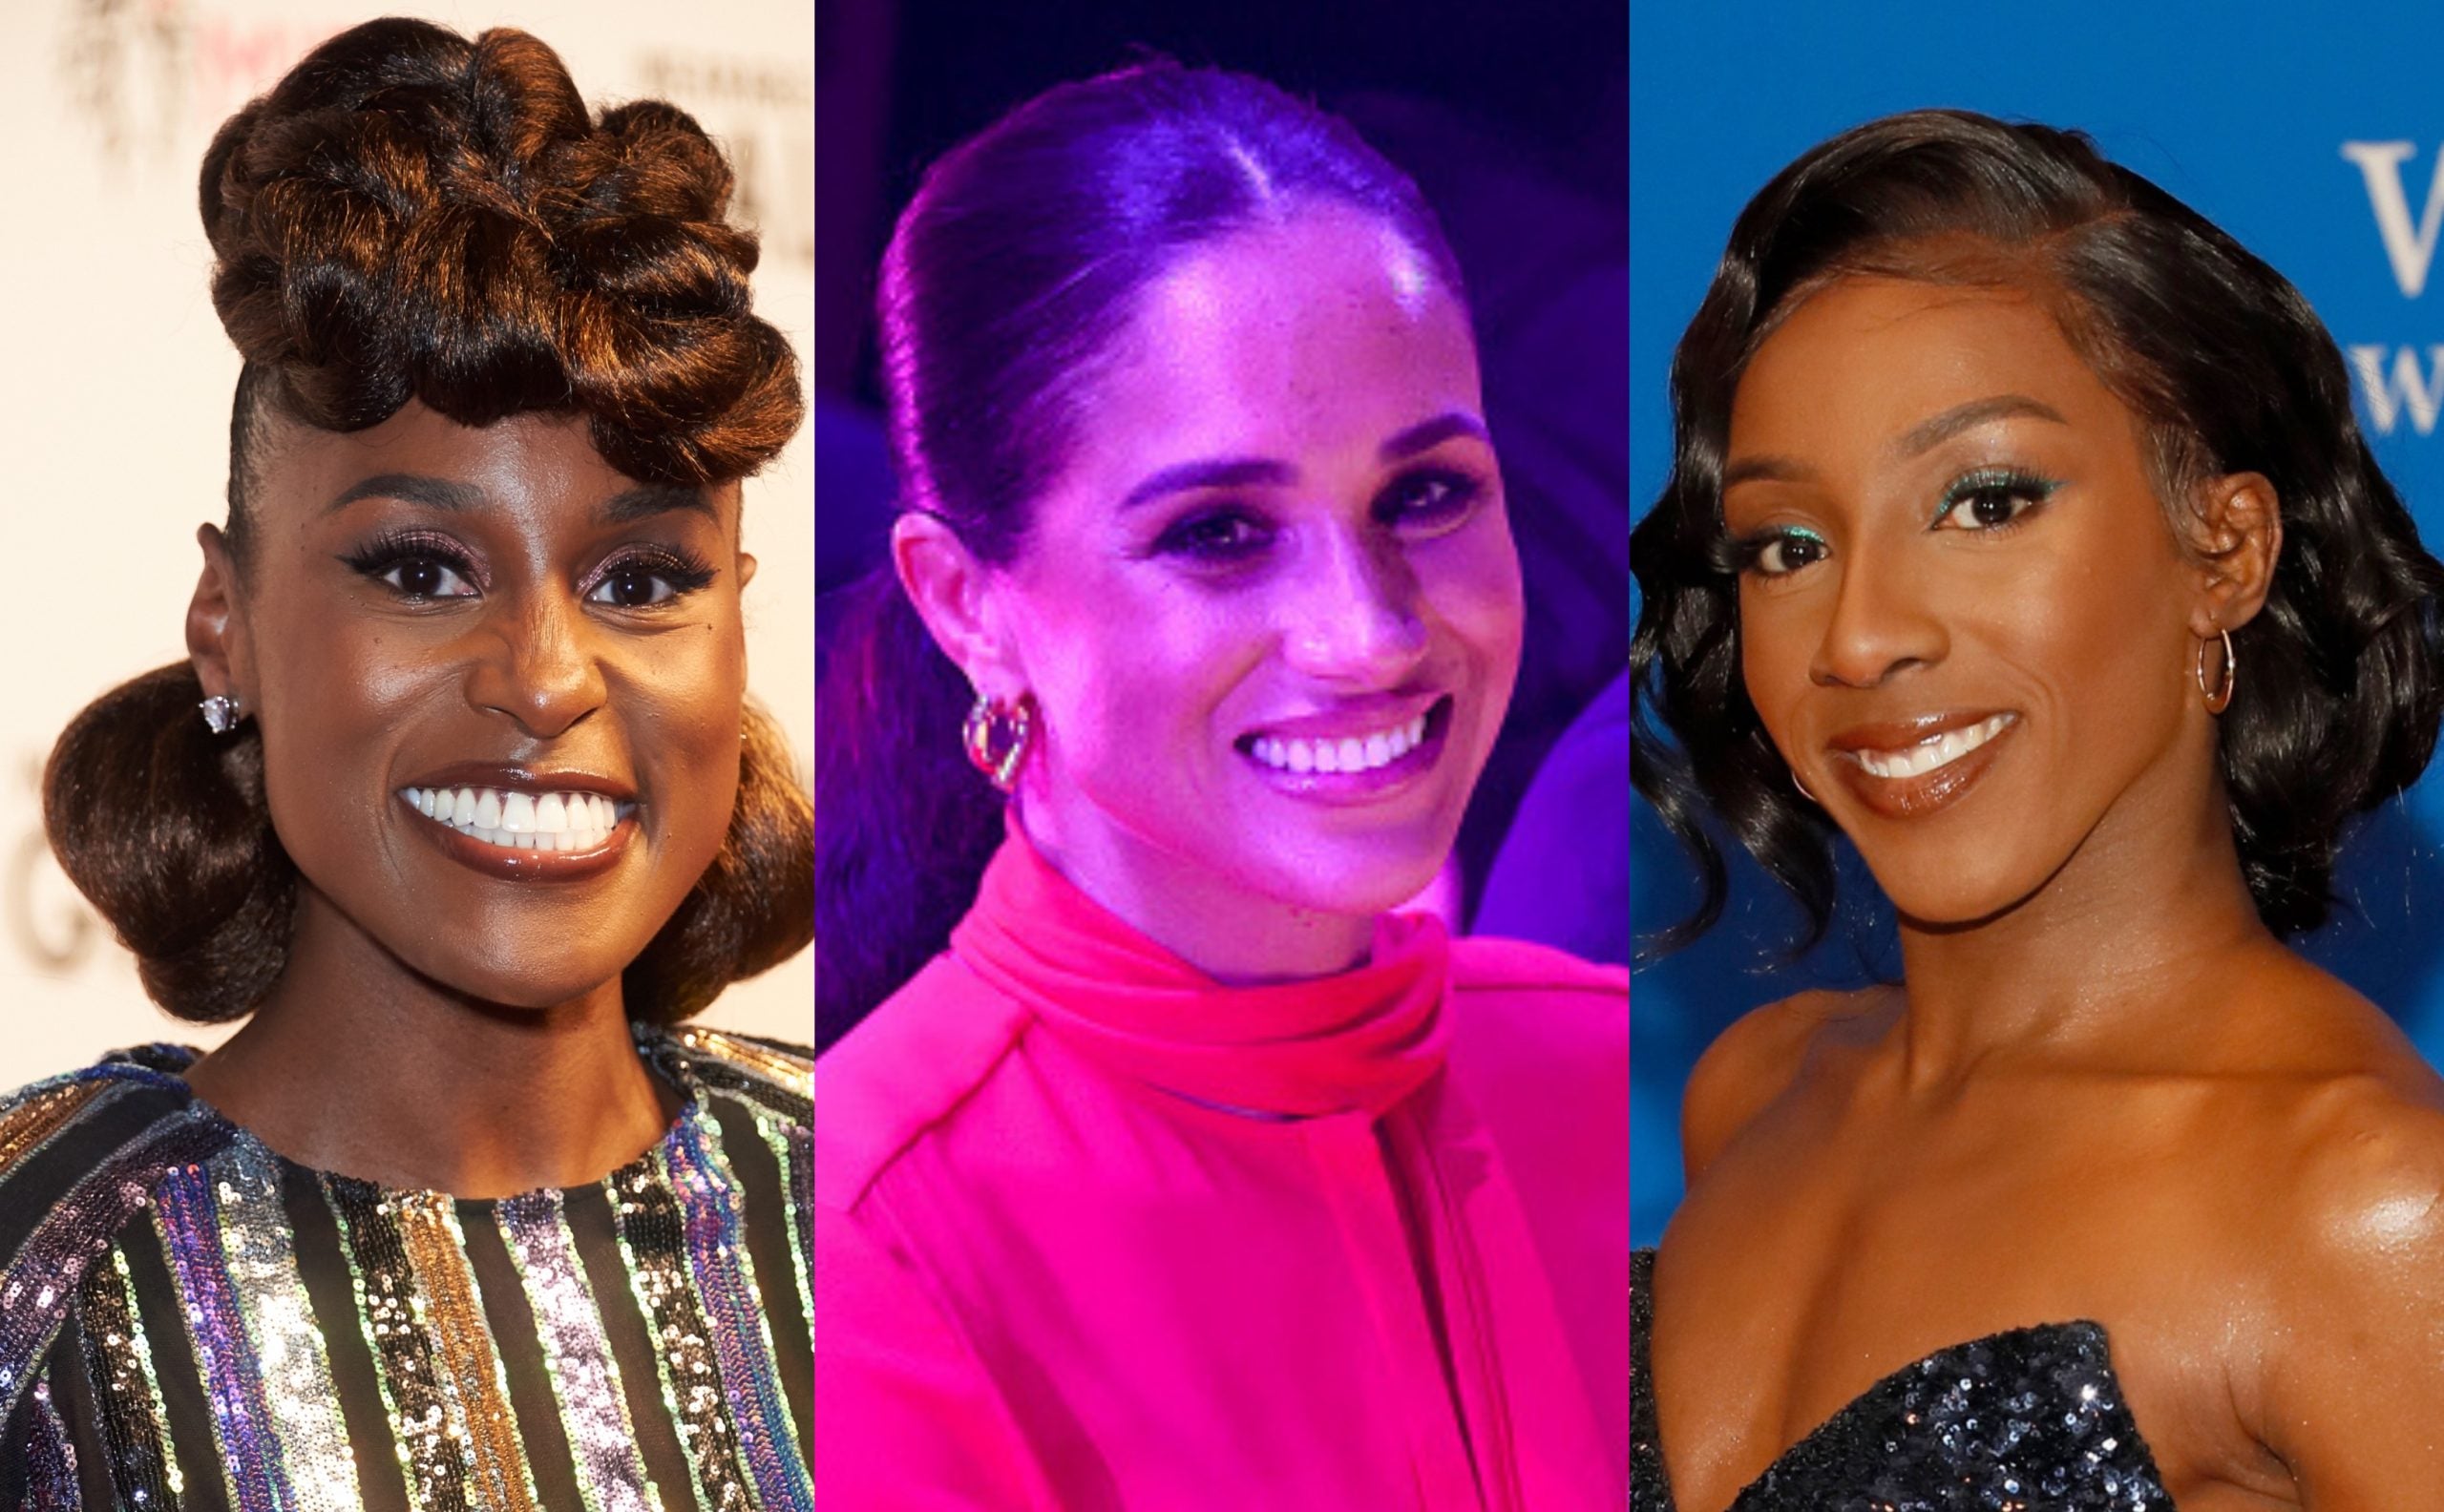 Issa Rae And Ziwe Discuss The ‘Angry Black Woman’ Stereotype On Meghan Markle’s Podcast